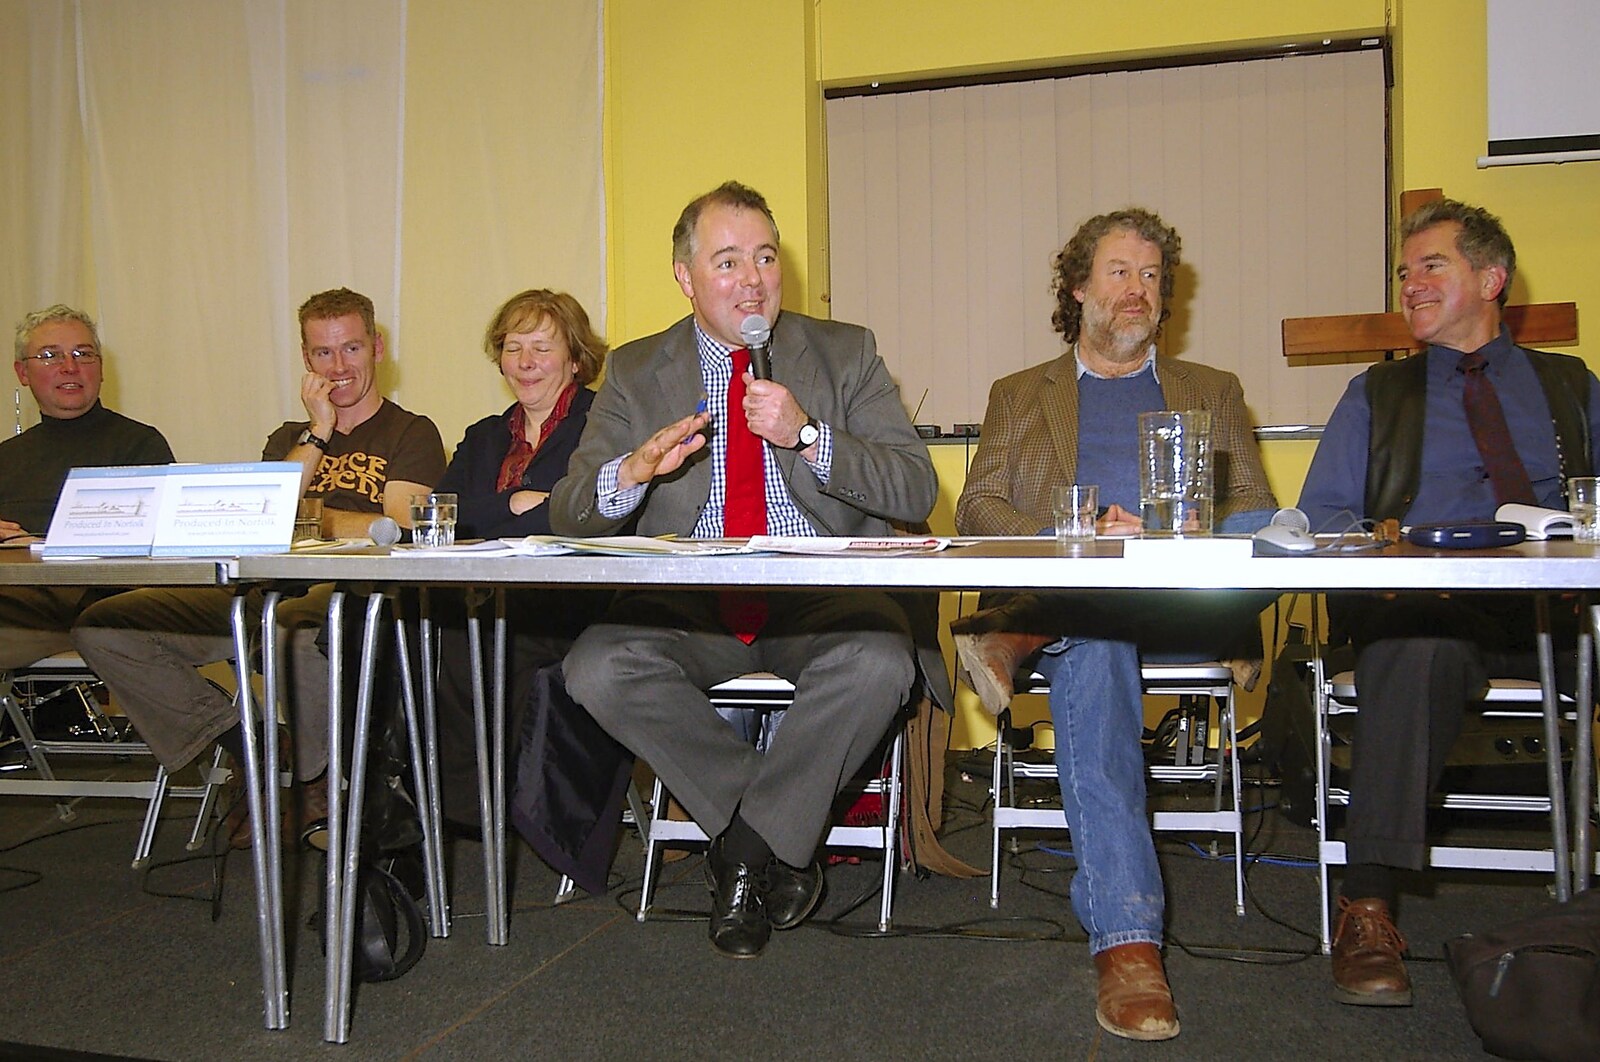 The whole panel from Dom in da Chapel, Safeway Chickens and Evil Supermarkets, Harleston and Grimston - 15th January 2006